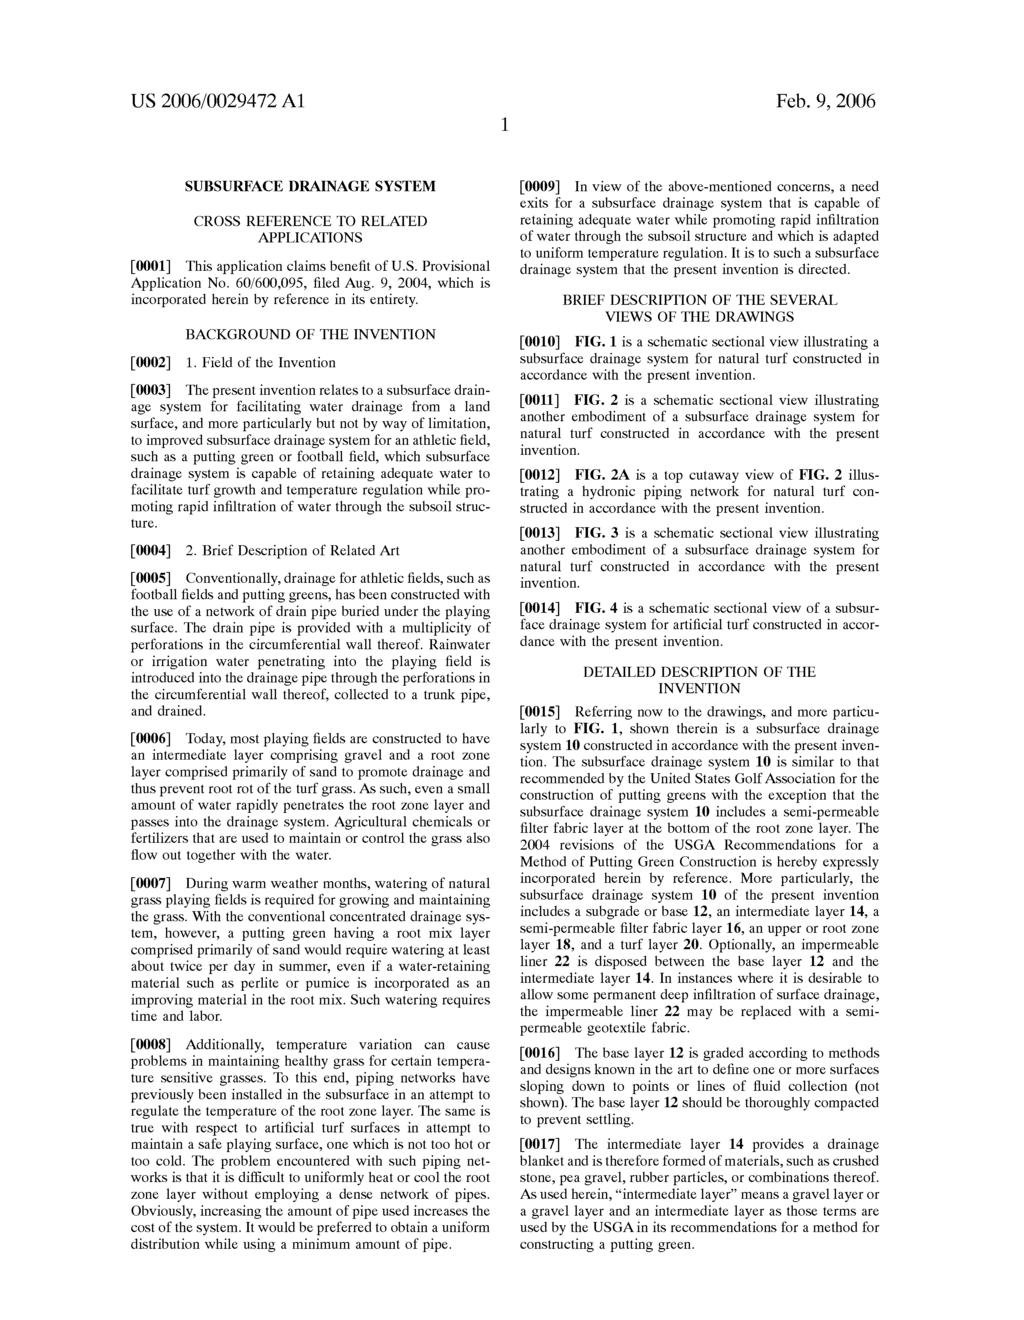 US 2006/0029472 A1 Feb. 9, 2006 SUBSURFACE DRANAGE SYSTEM CROSS REFERENCE TO RELATED APPLICATIONS 0001. This application claims benefit of U.S. Provisional Application No. 60/600,095, filed Aug.